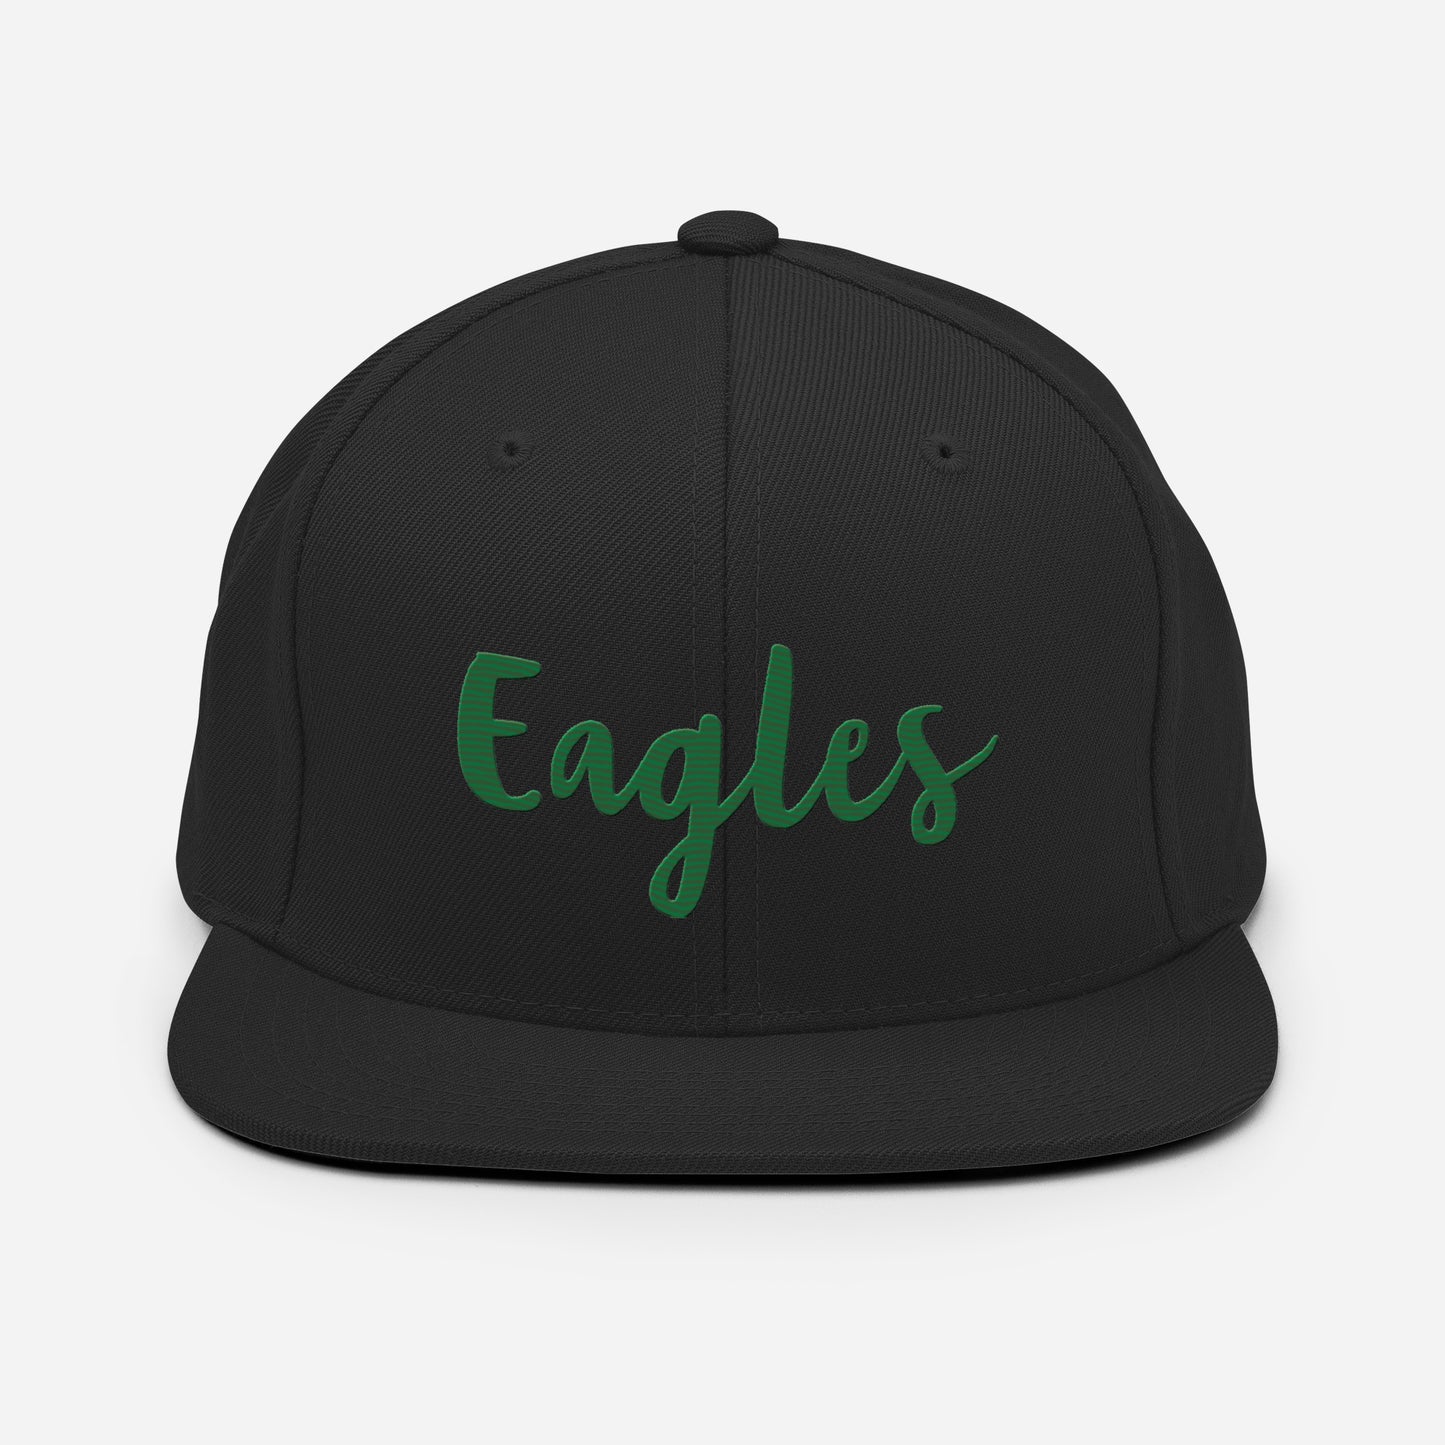 Eagles Hand Embroidered Snapback Hat